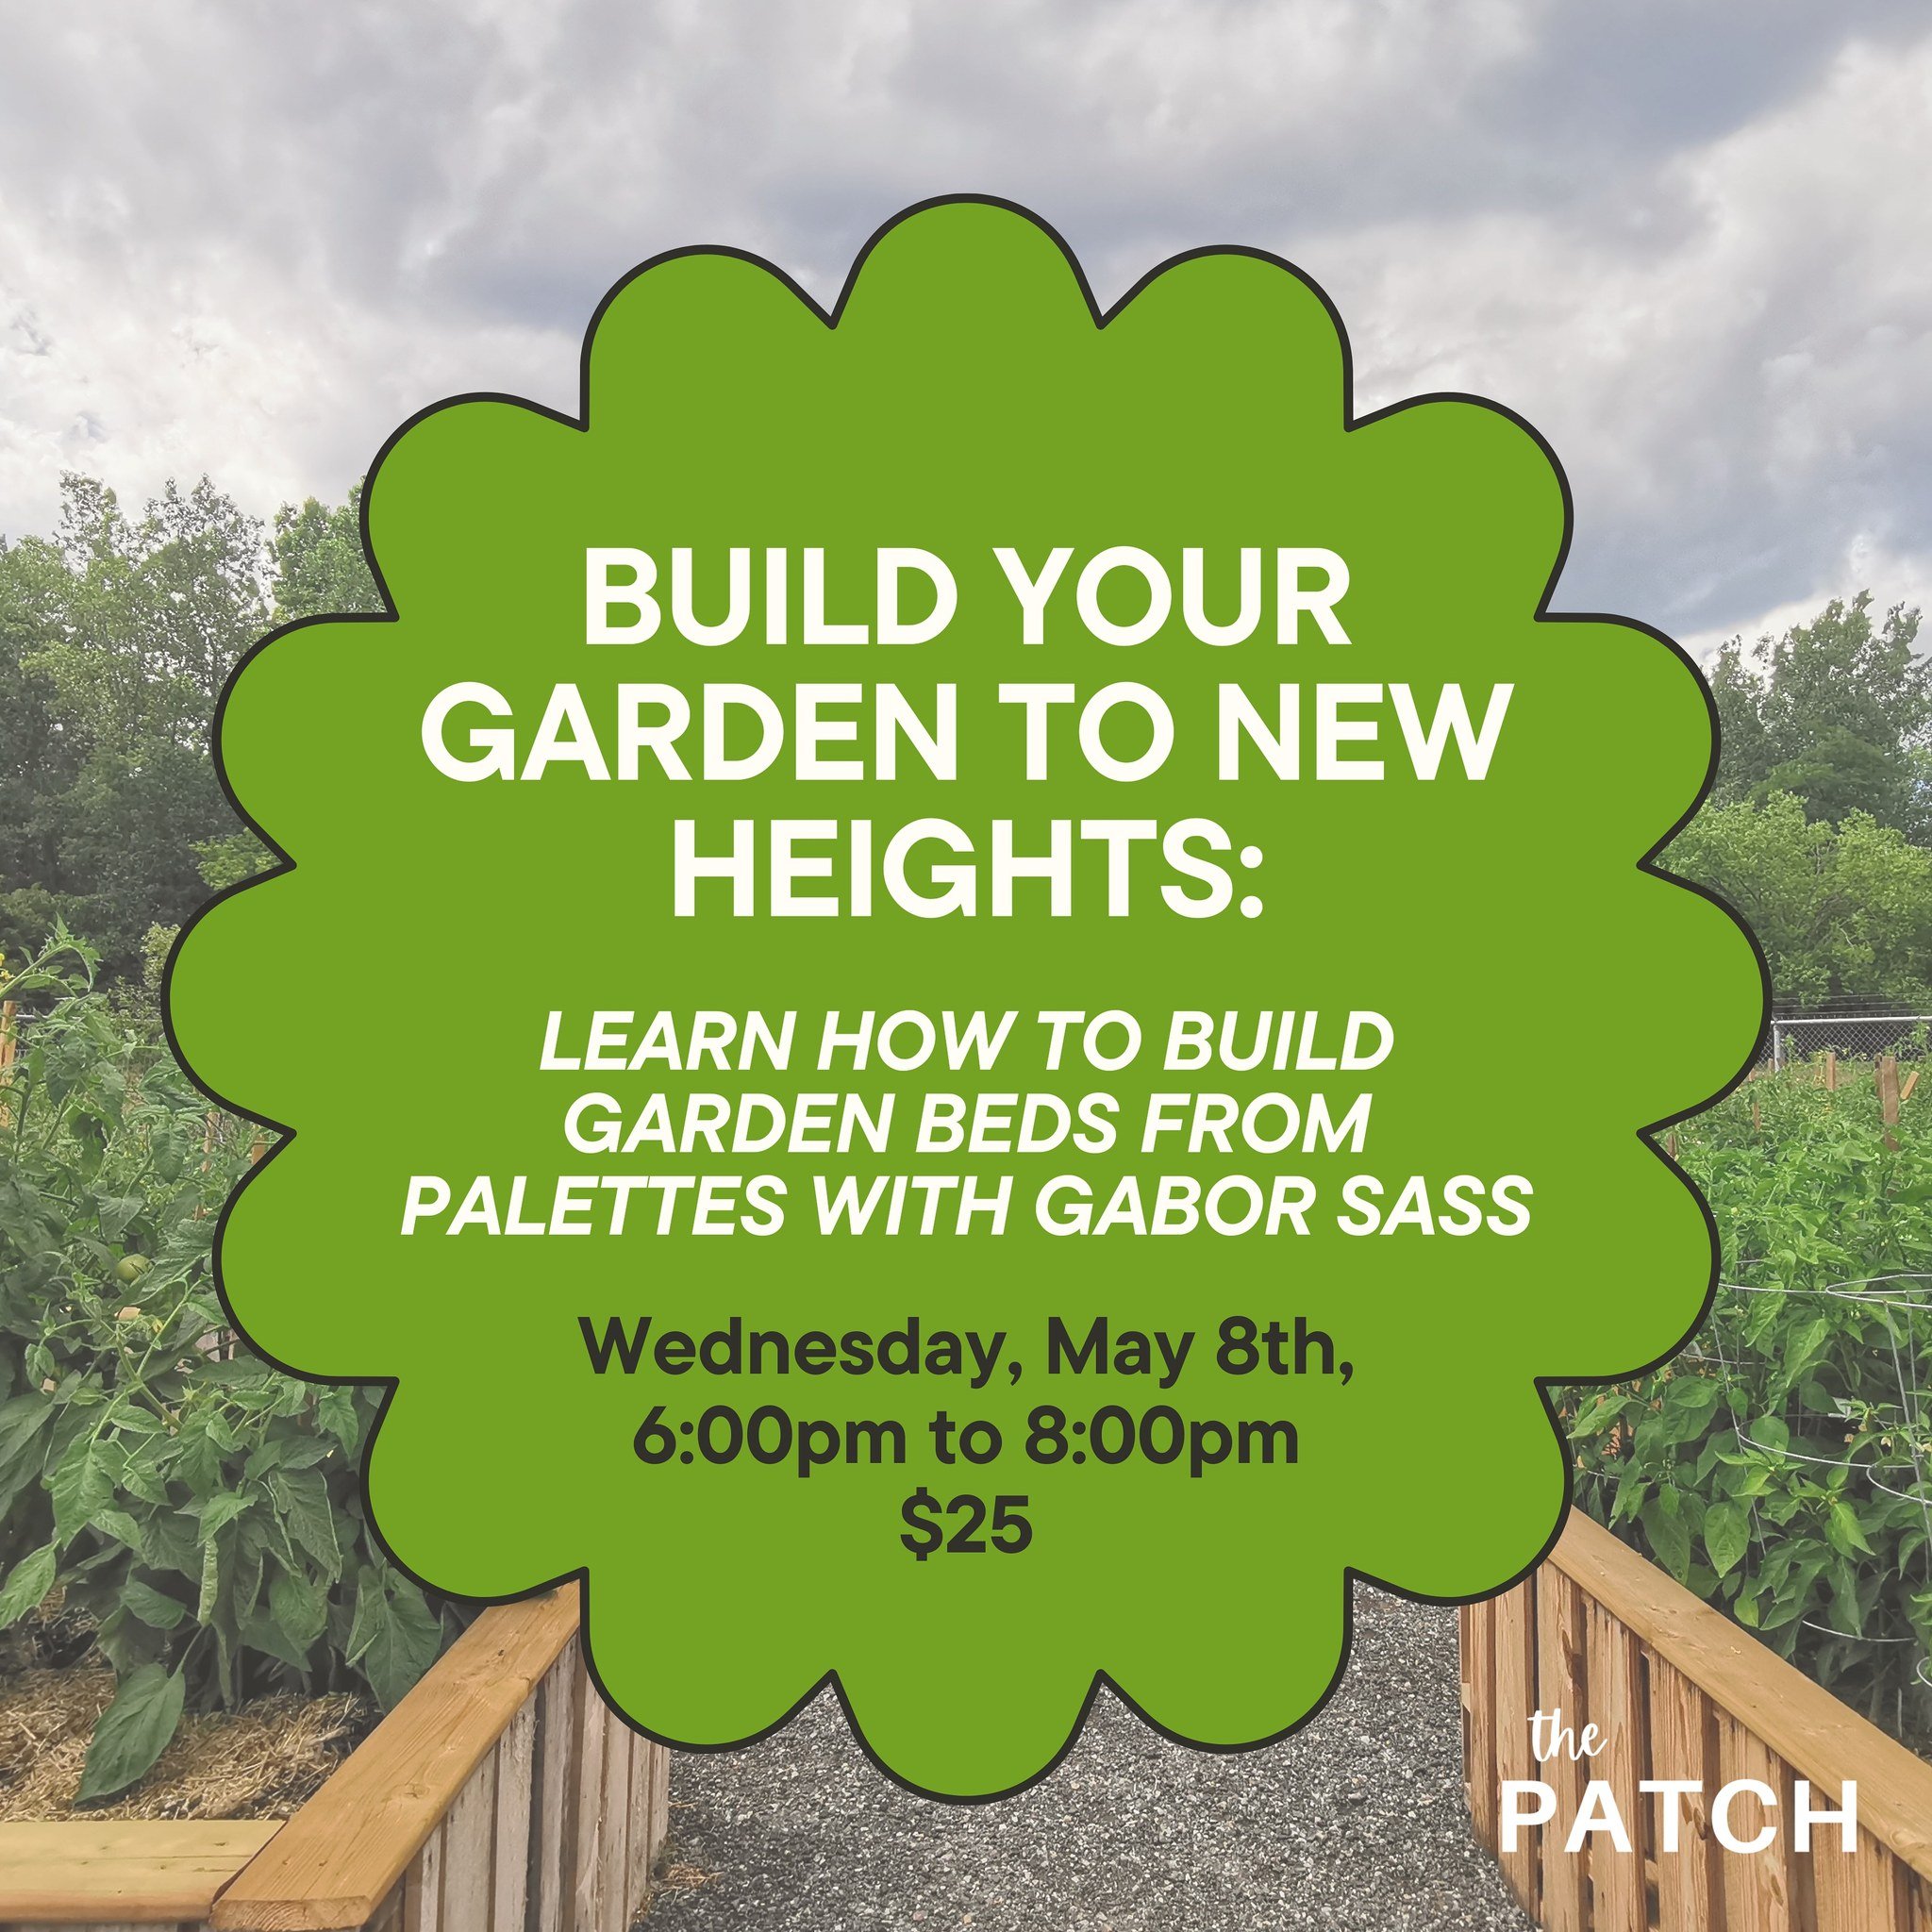 Come join us this Wednesday, May 8th from 6:00pm to 8:00pm for a fun and interactive workshop teaching you how to build raised garden beds from recycled palettes. We will cover the general perks, materials, and easy assembly techniques. Sign up throu